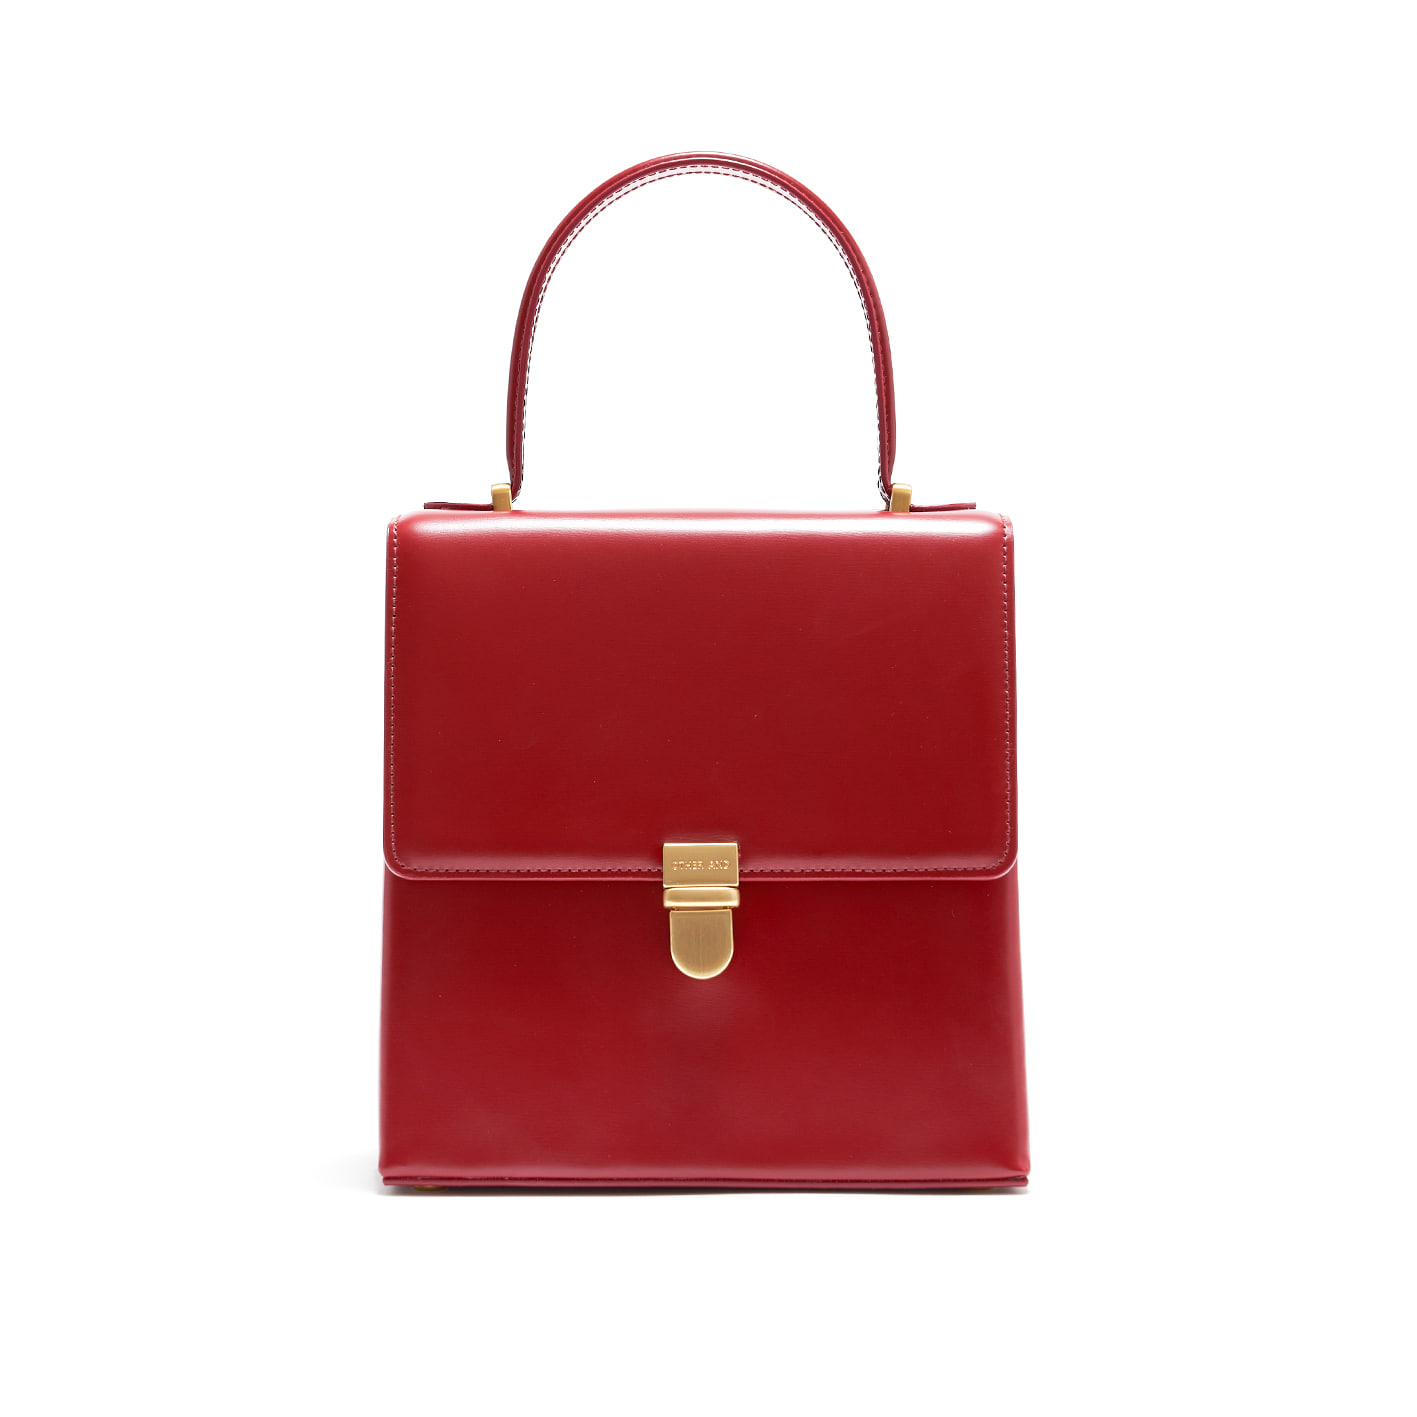 LARGE_MORE BAG_ruby red